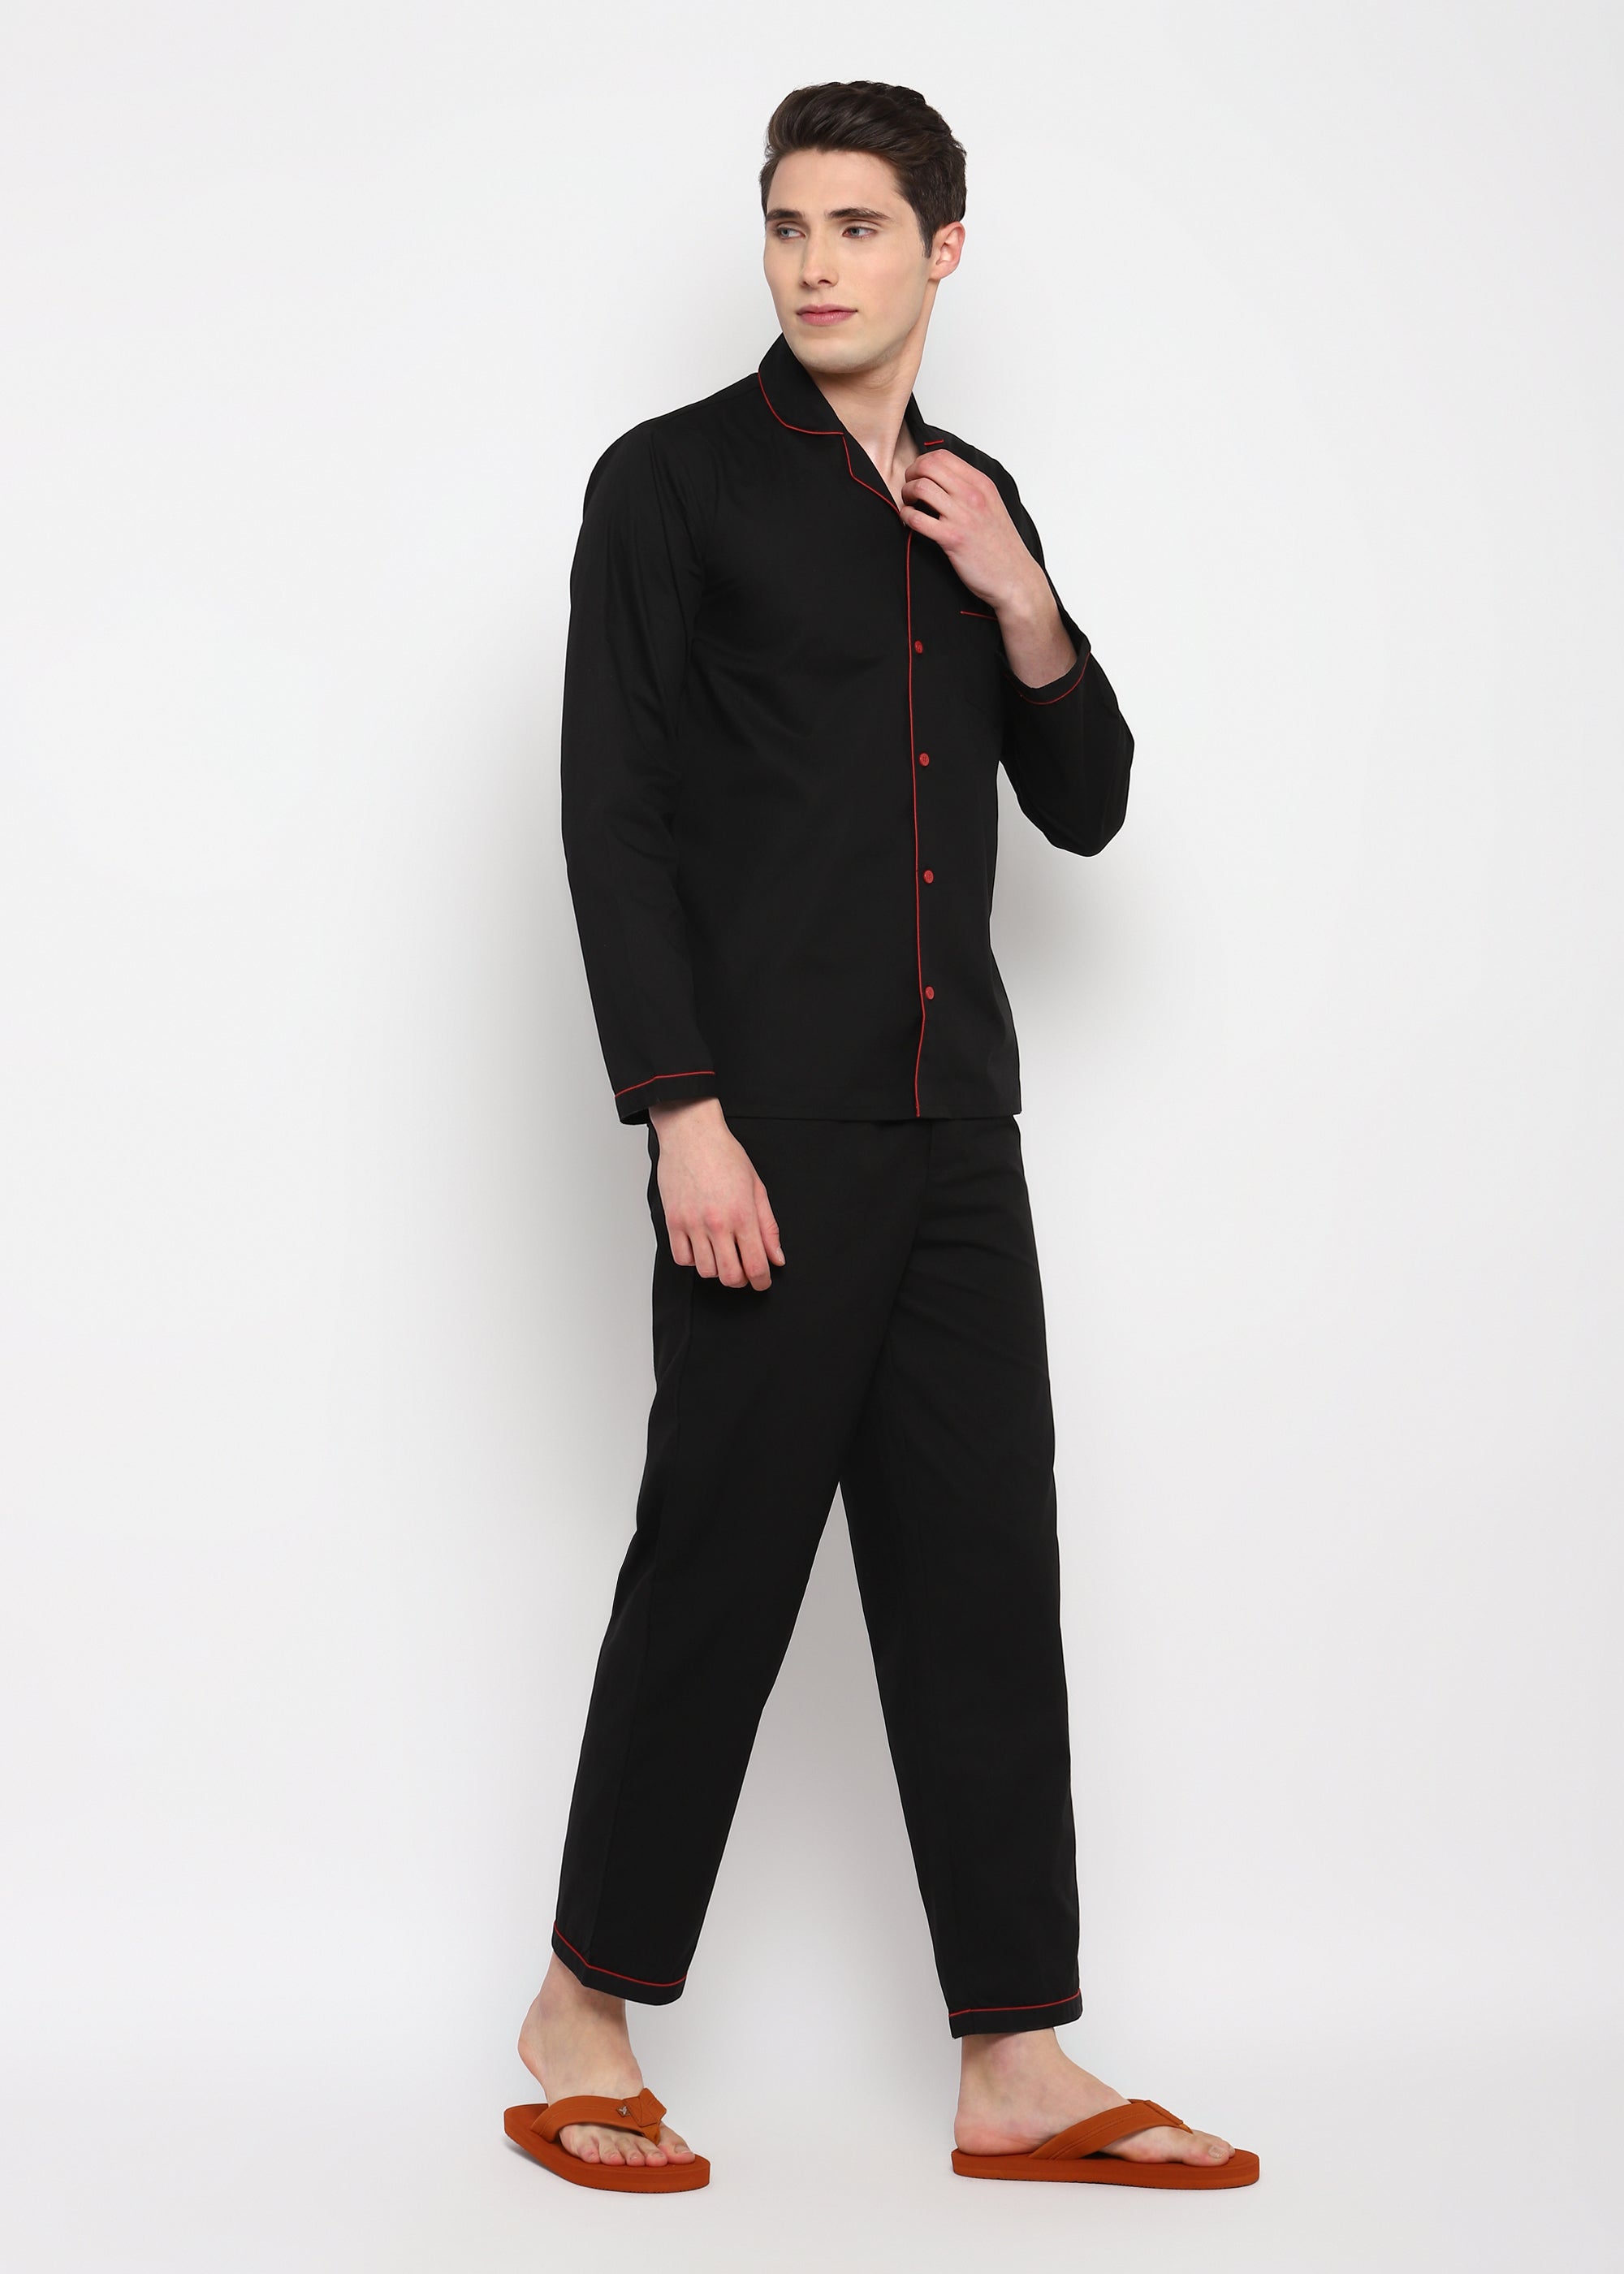 Black Cotton with Red Piping Men's Night Suit